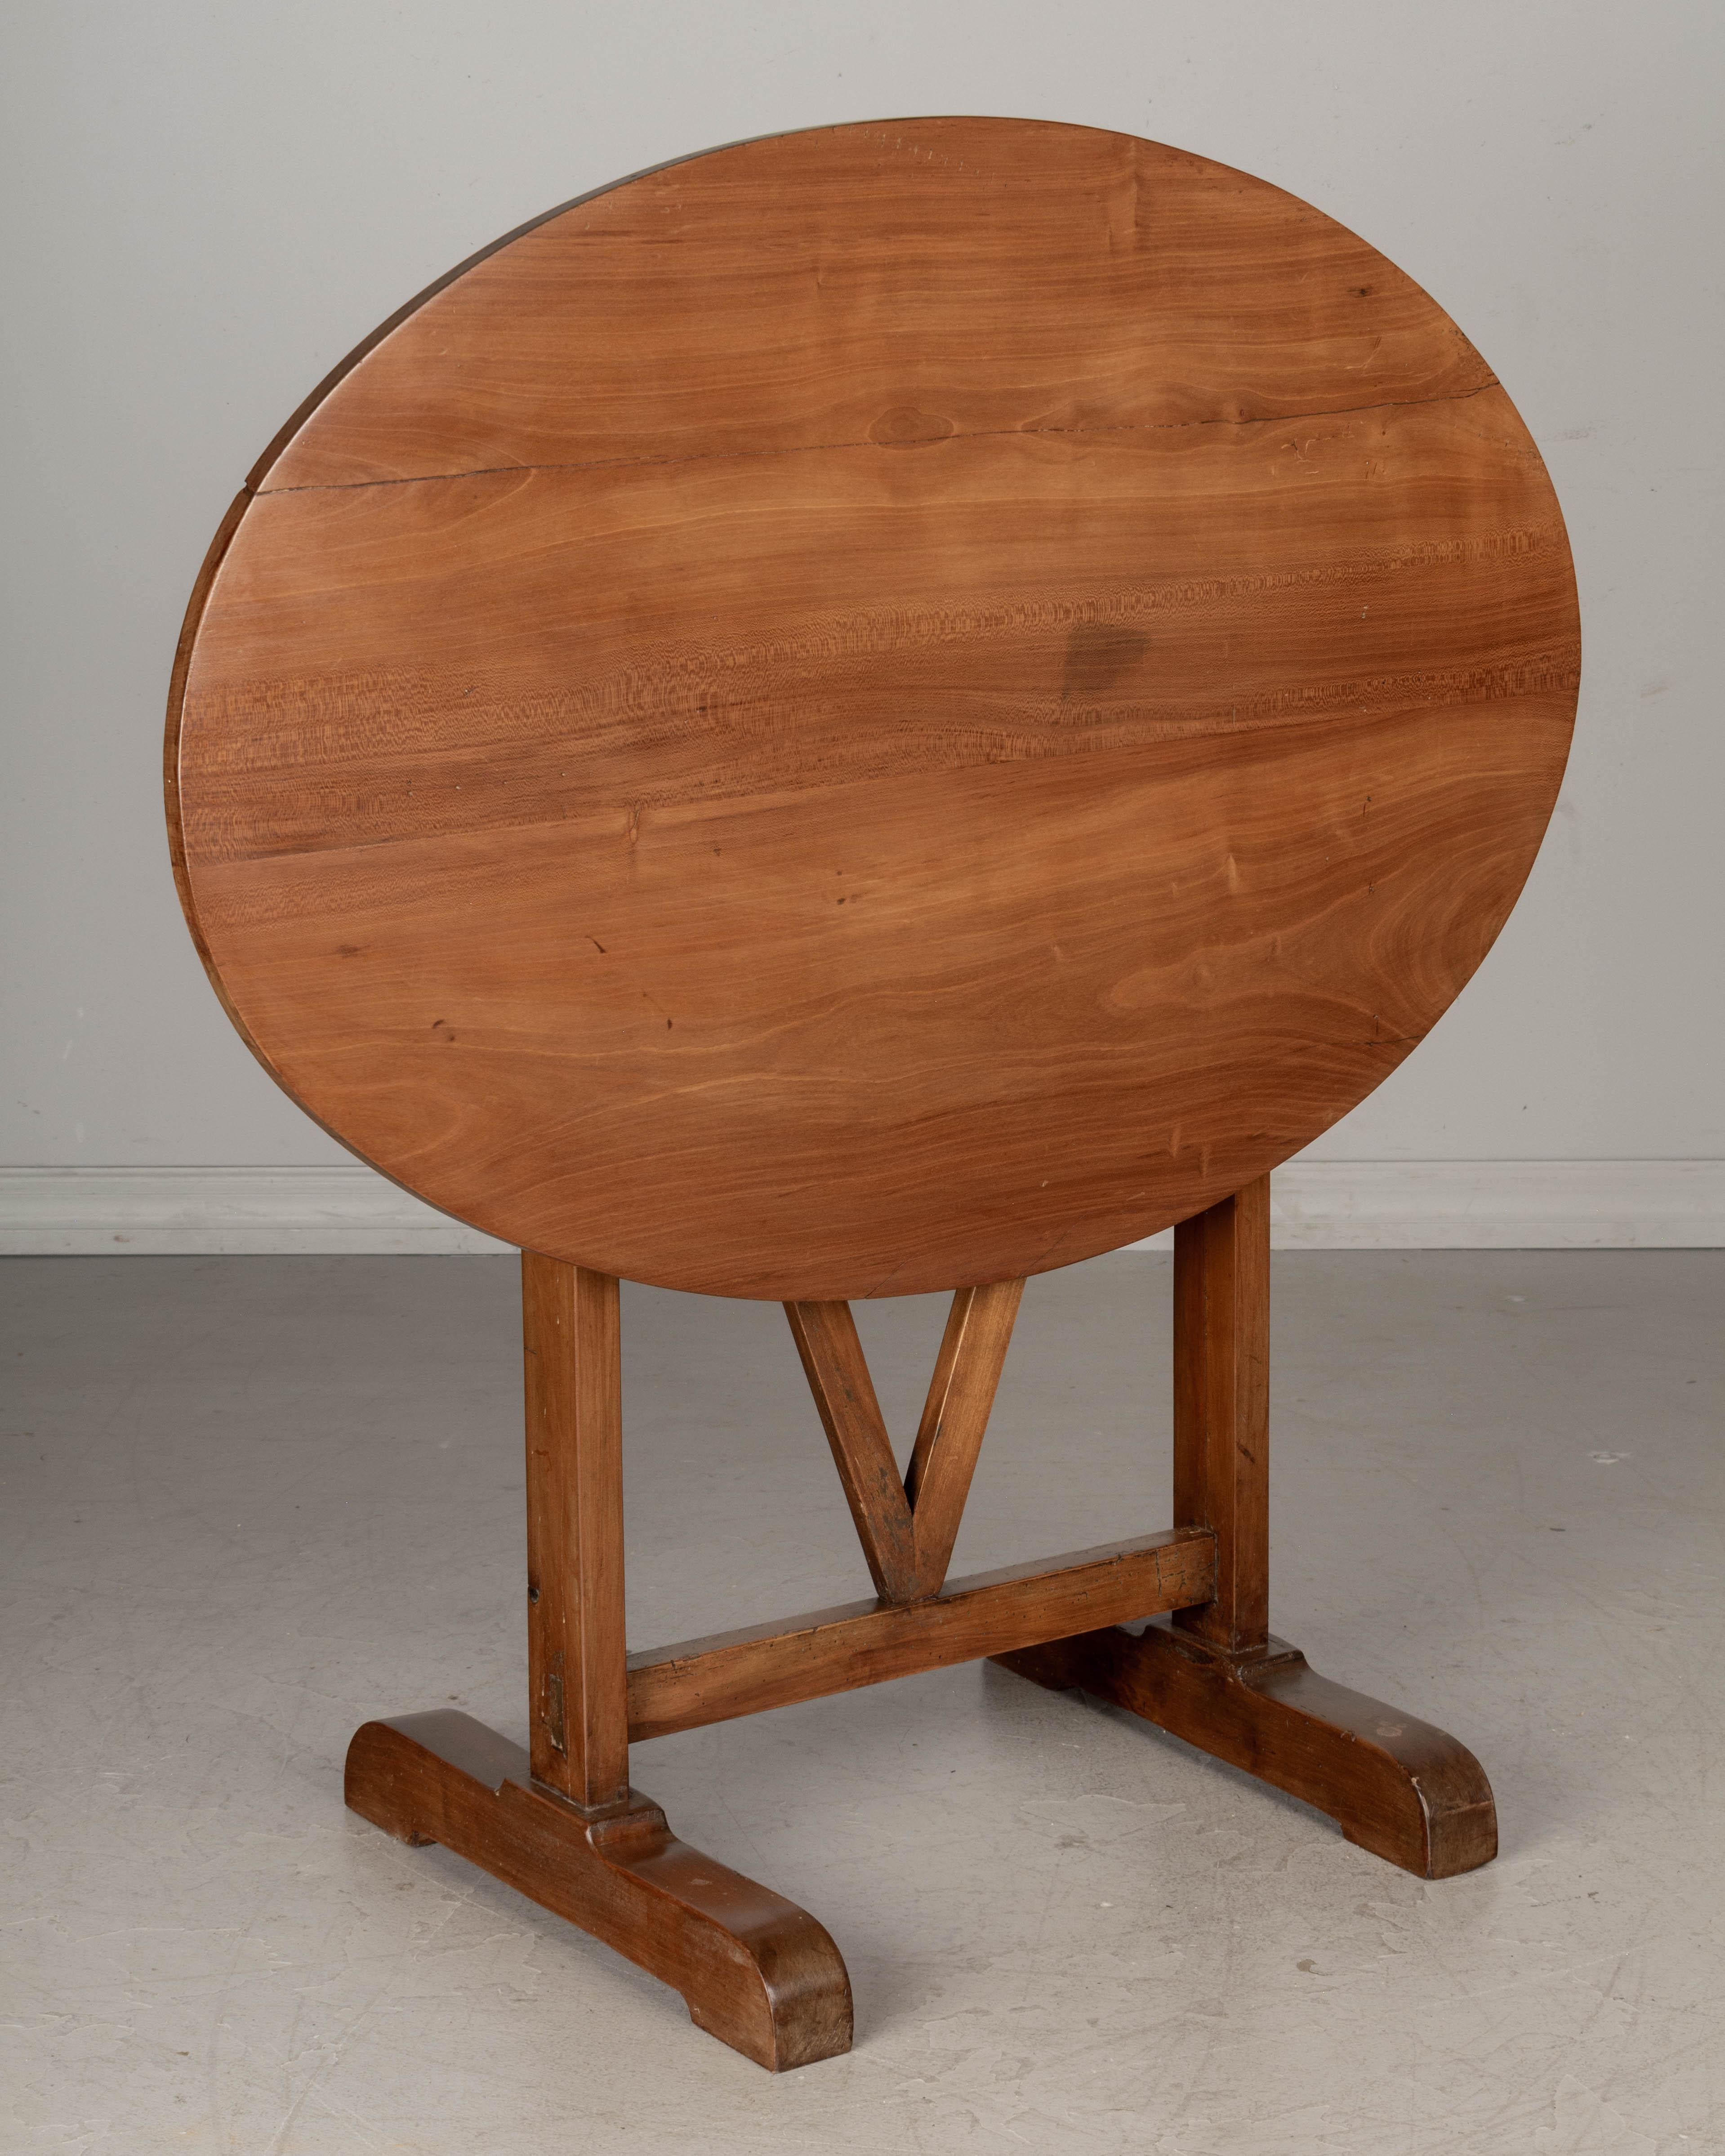 Hand-Crafted French Oval Tilt-Top Table